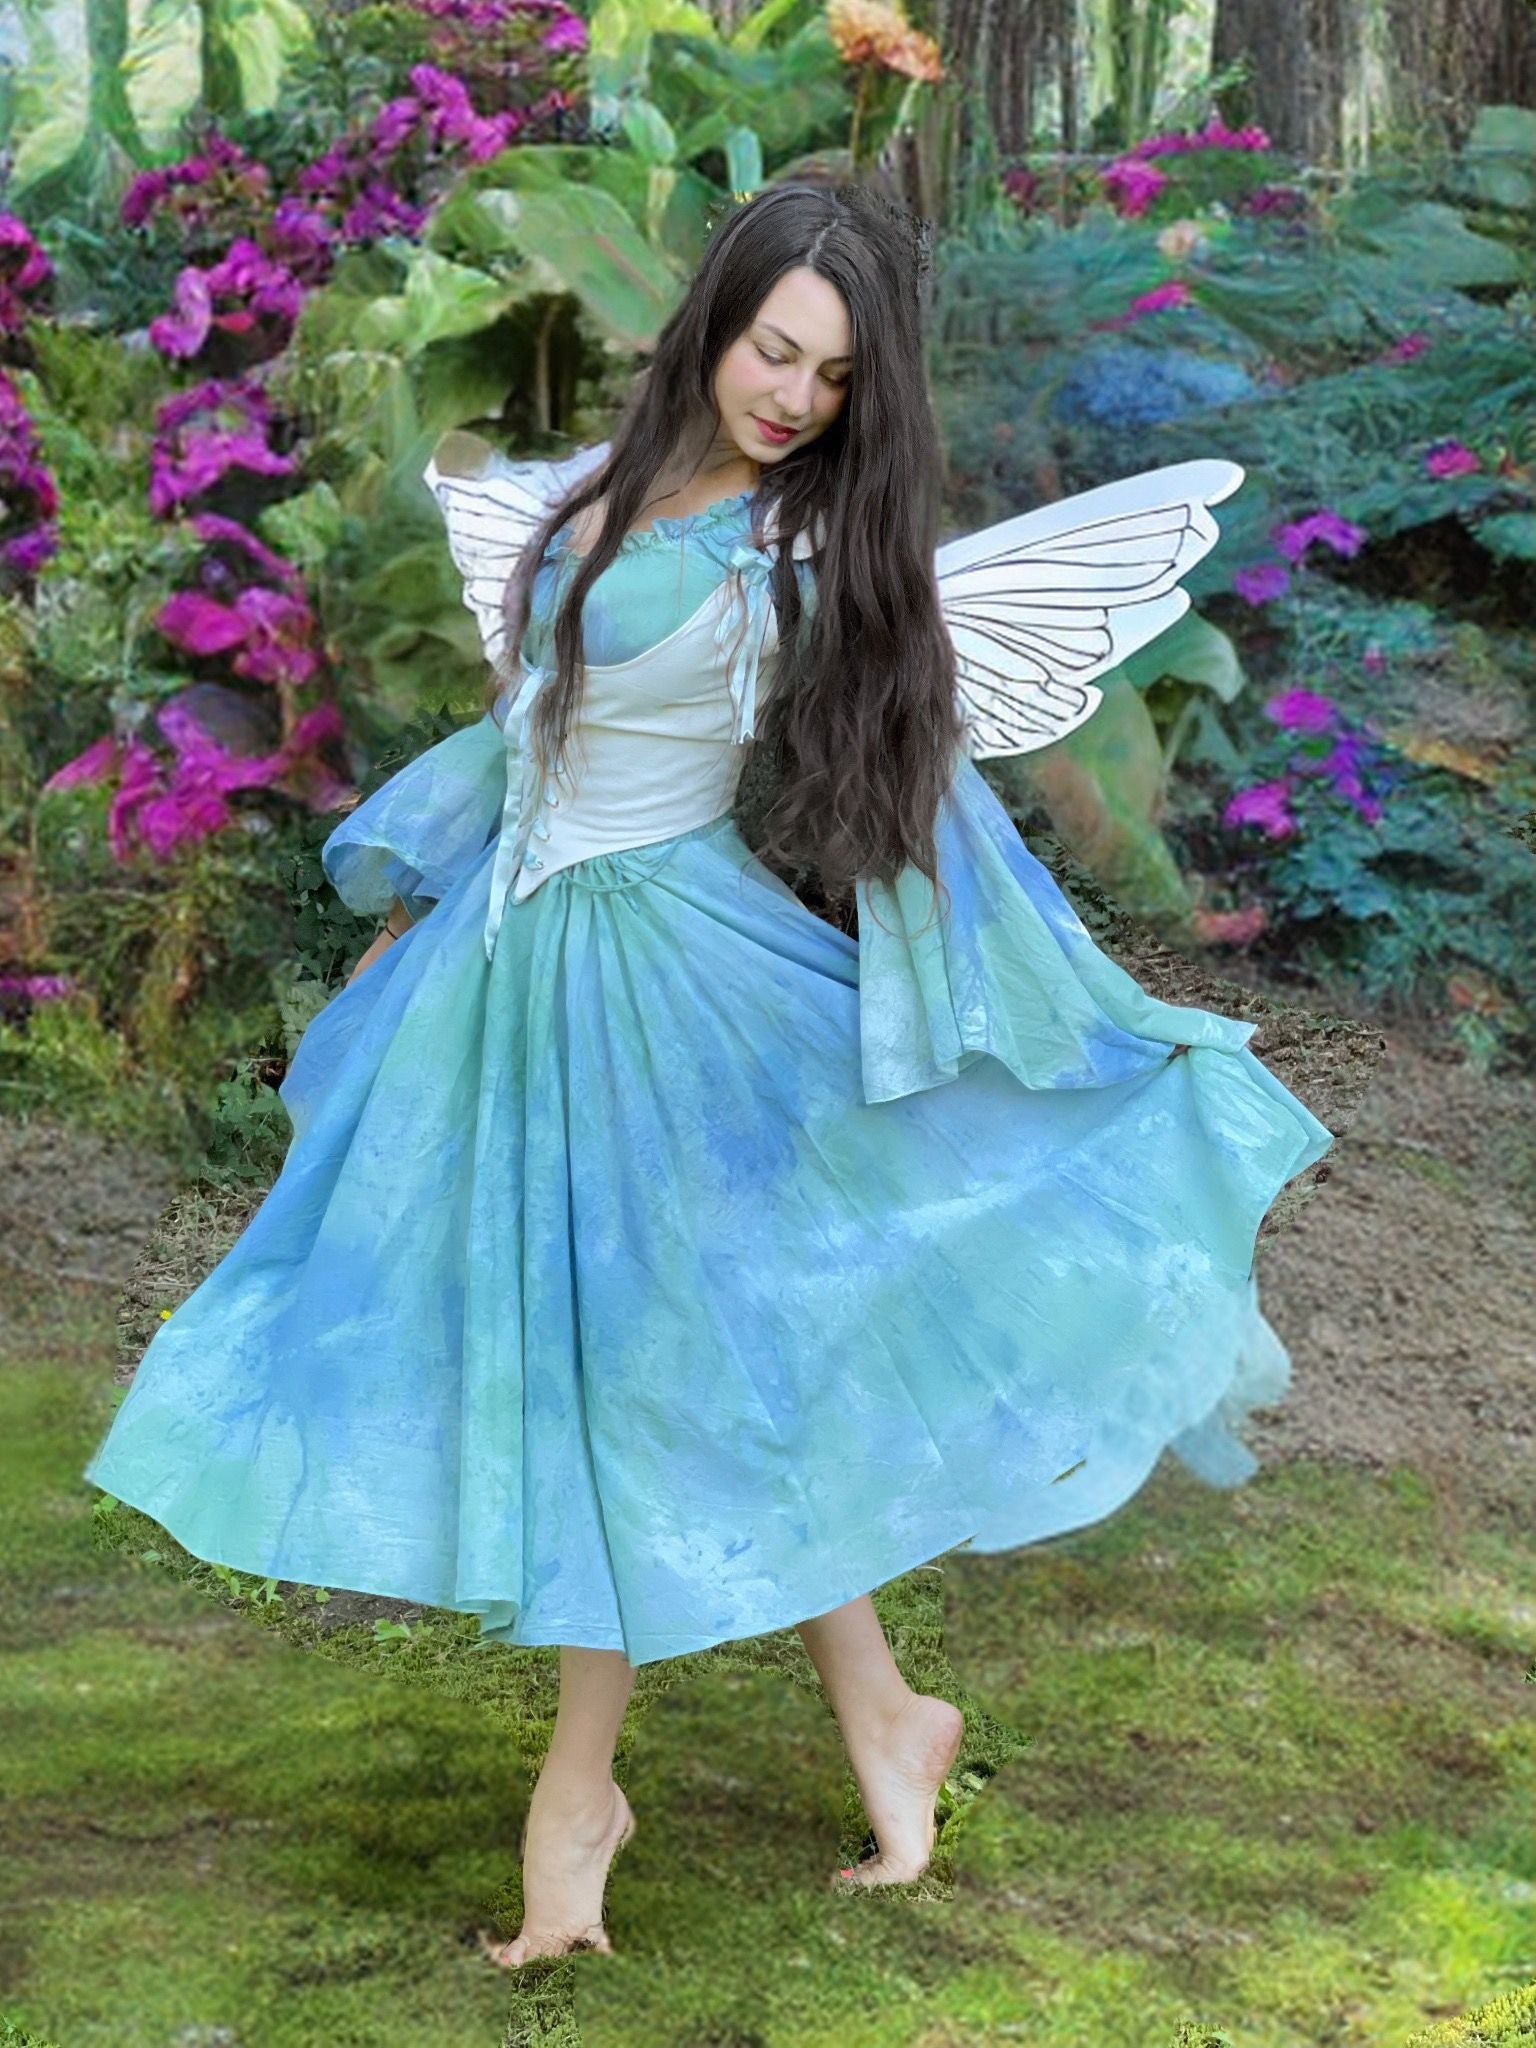 The Dream Fairy - Storybook Fairytale Costume - One-Of-A-Kind- Unique Hand-Dyed Watercolor Pixie 100% Cotton Costume